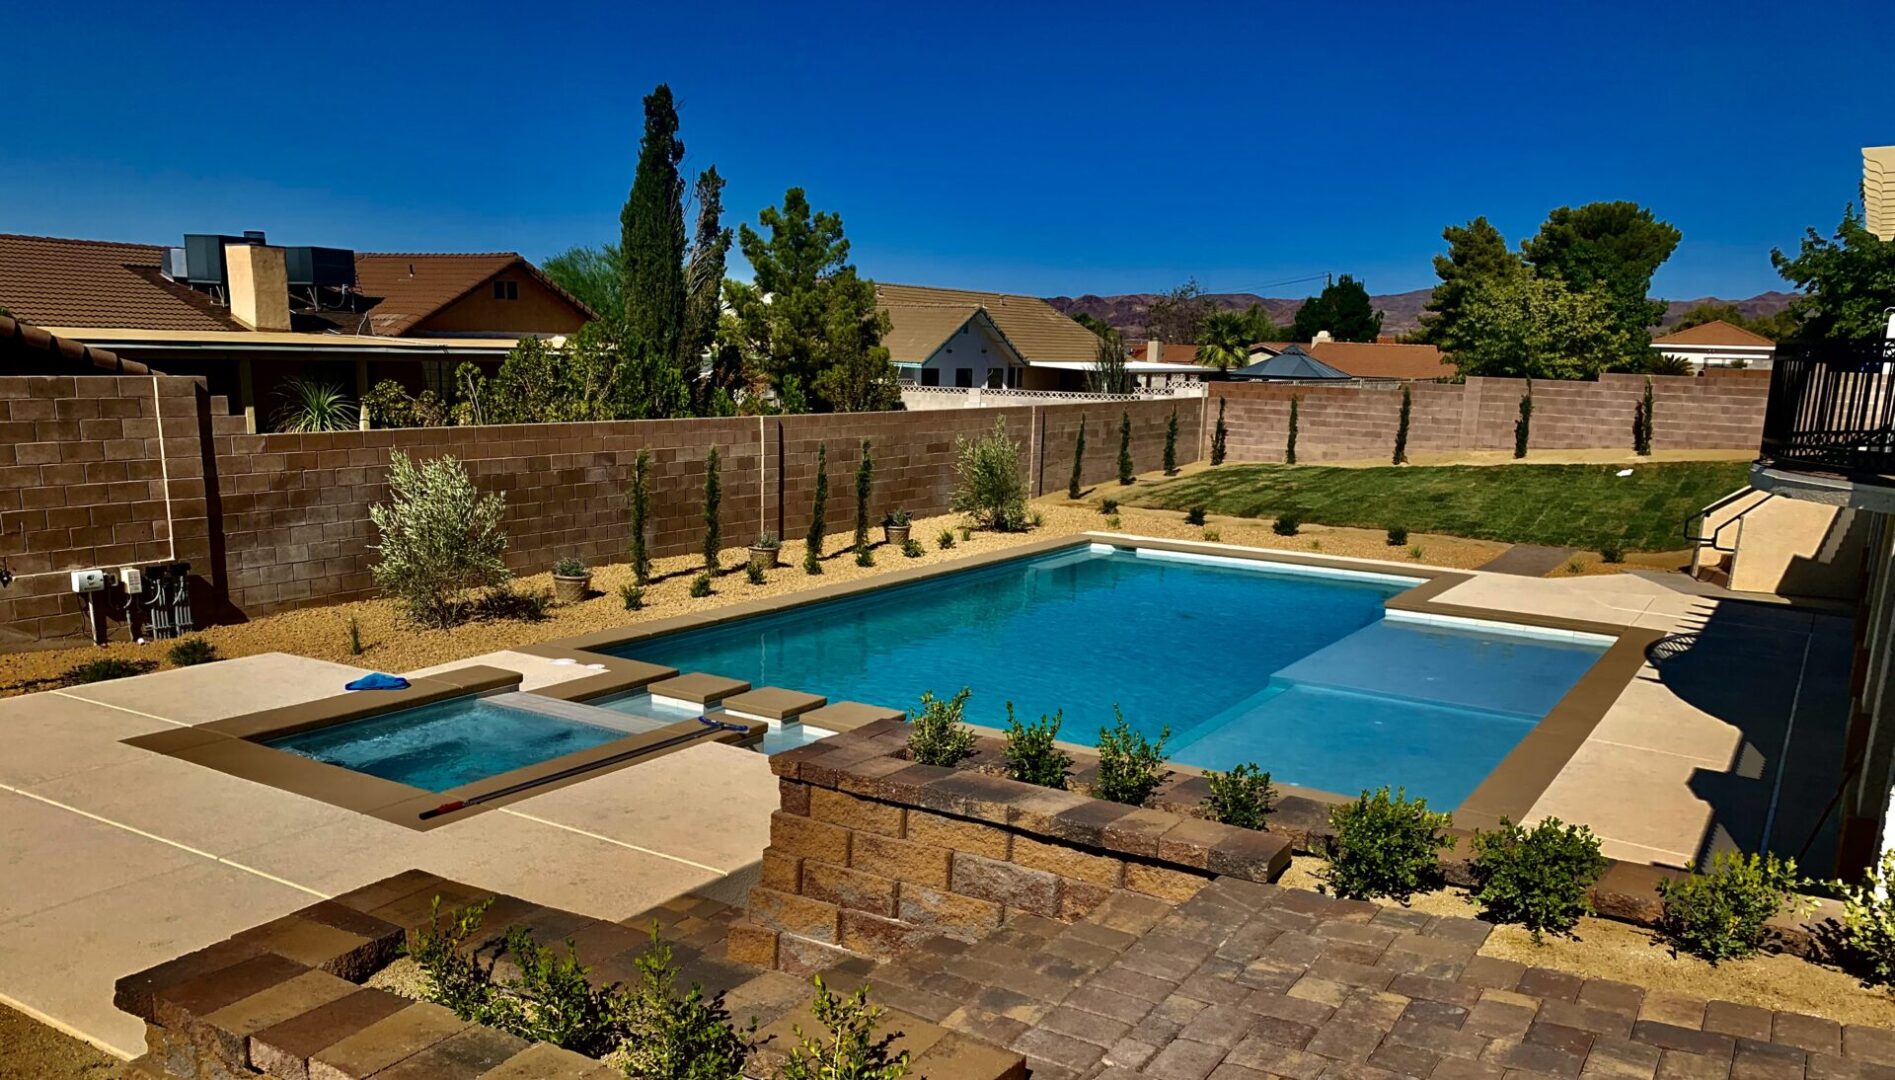 A pool with a large stone wall and a brick patio.